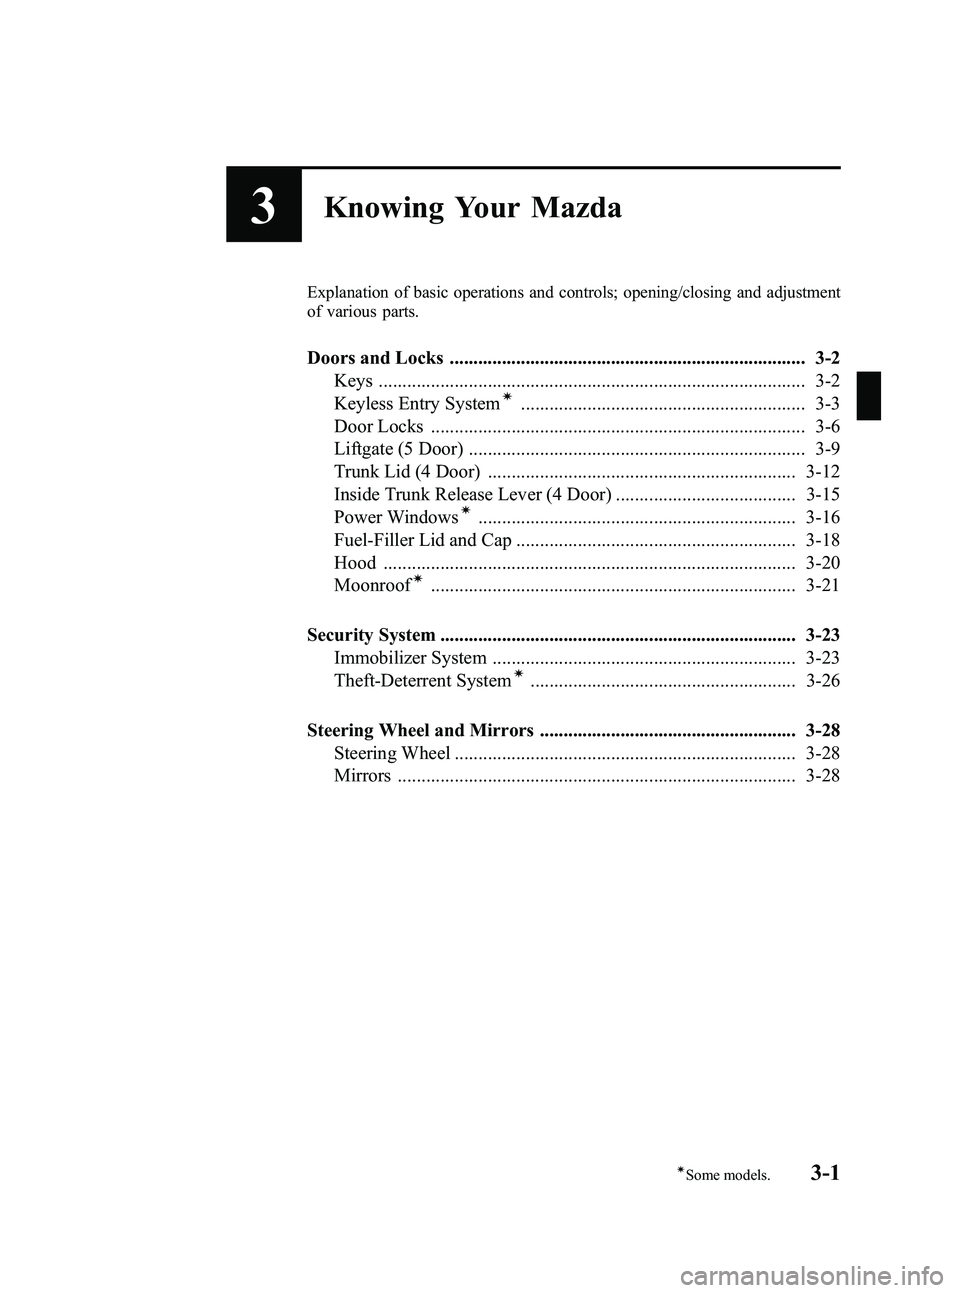 MAZDA MODEL 5 2006  Owners Manual Black plate (71,1)
3Knowing Your Mazda
Explanation of basic operations and controls; opening/closing and adjustment
of various parts.
Doors and Locks ..................................................